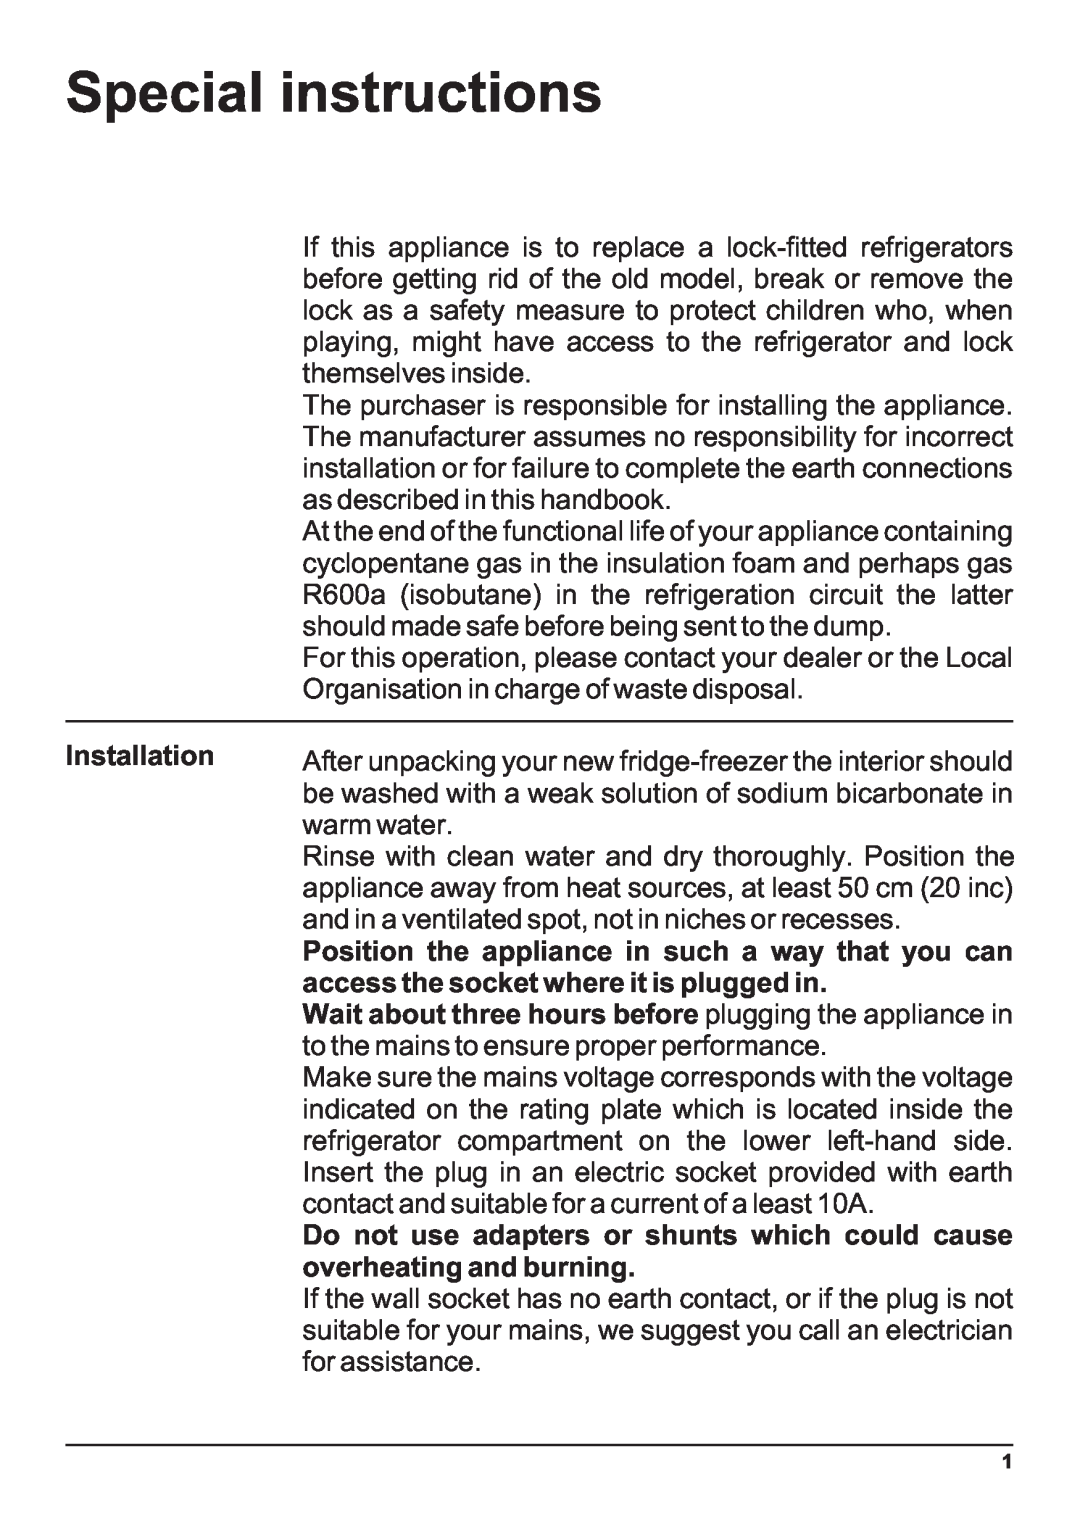 Indesit Two-Door Refrigerator/Freezer manual Special instructions, Installation, access the socket where it is plugged in 